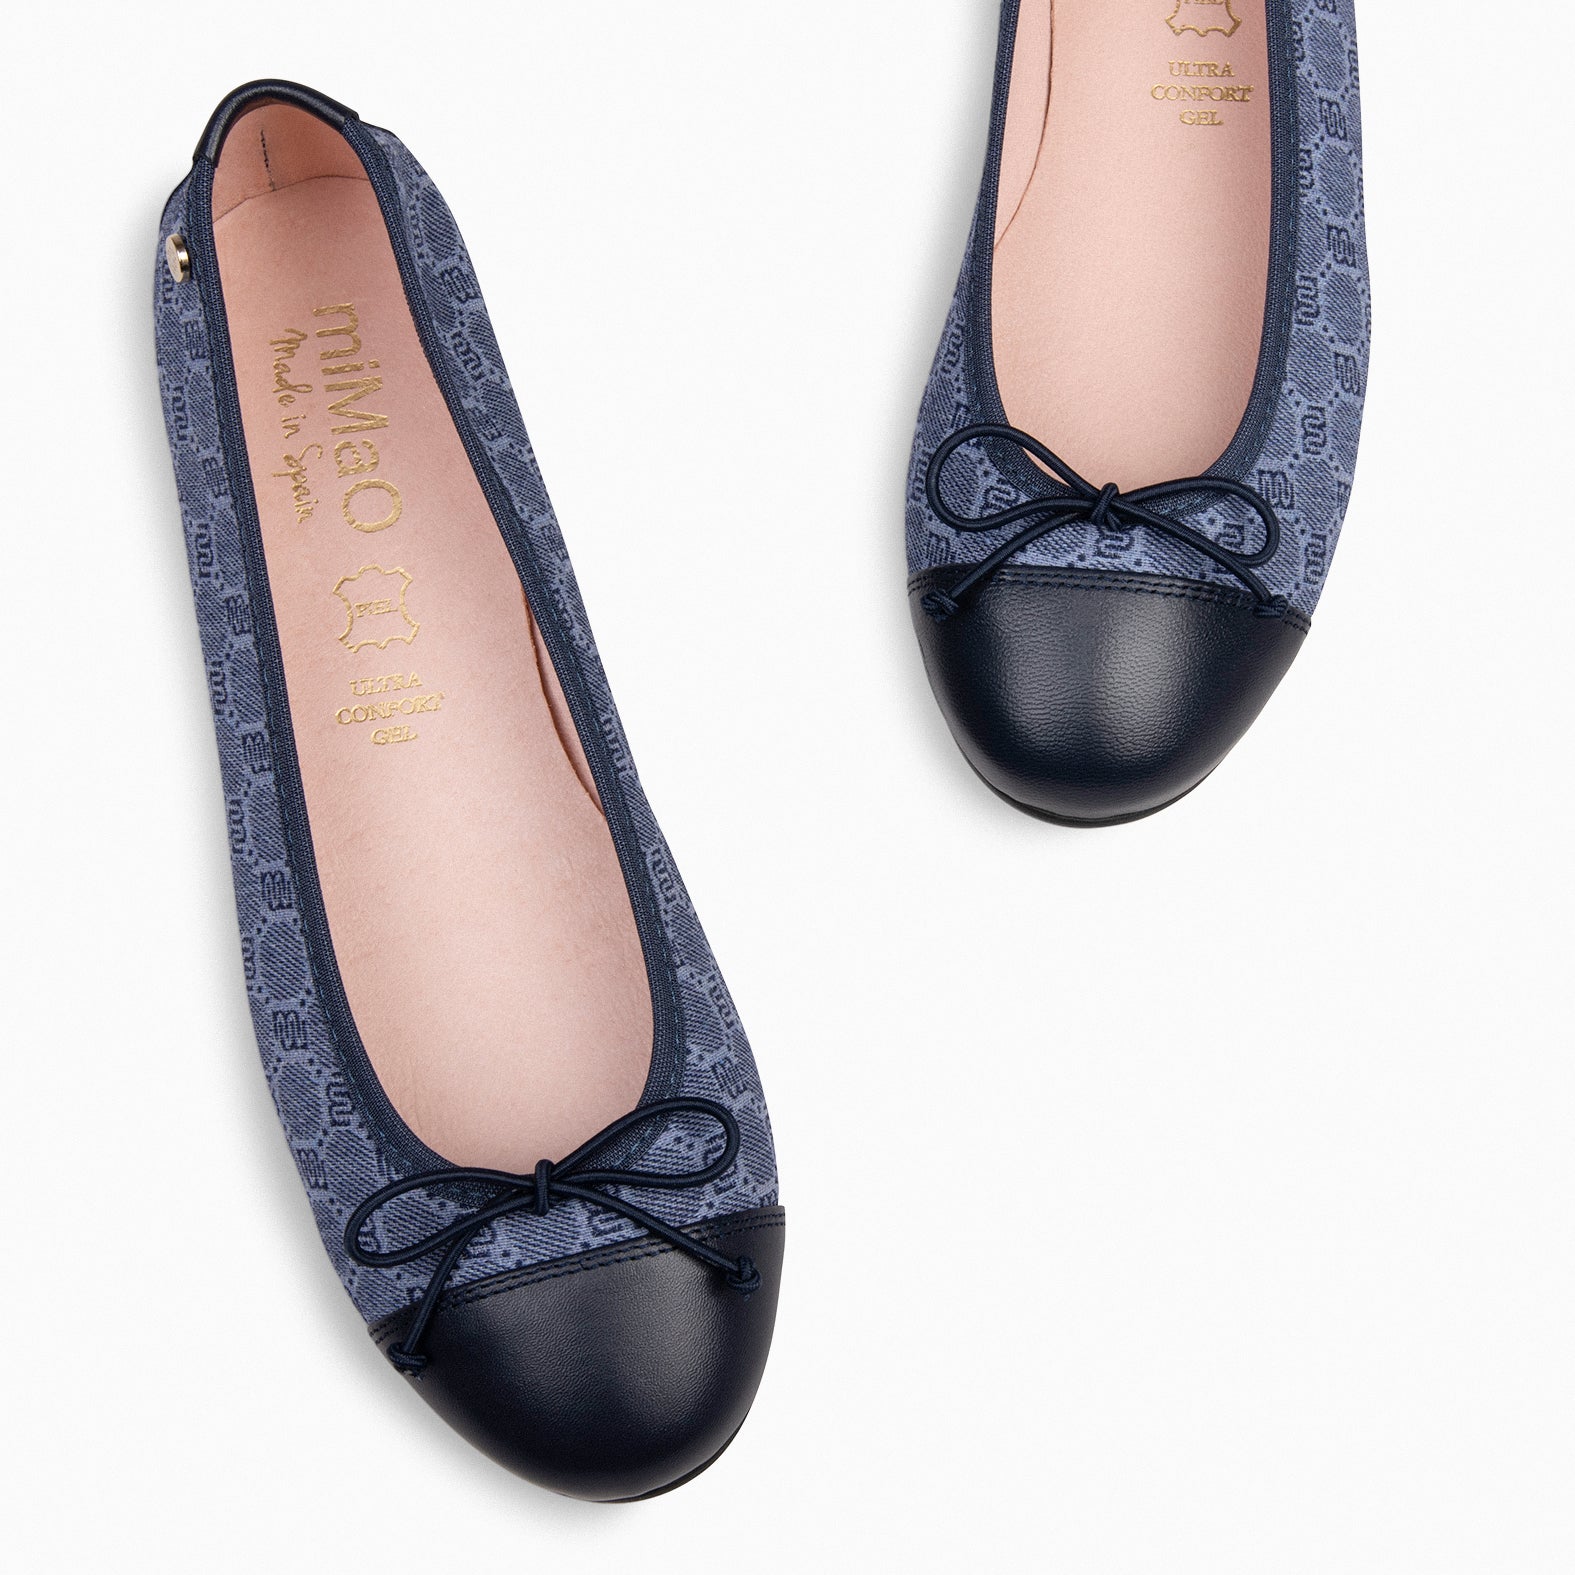 VICTORIA – NAVY BALLERINA WITH LACE